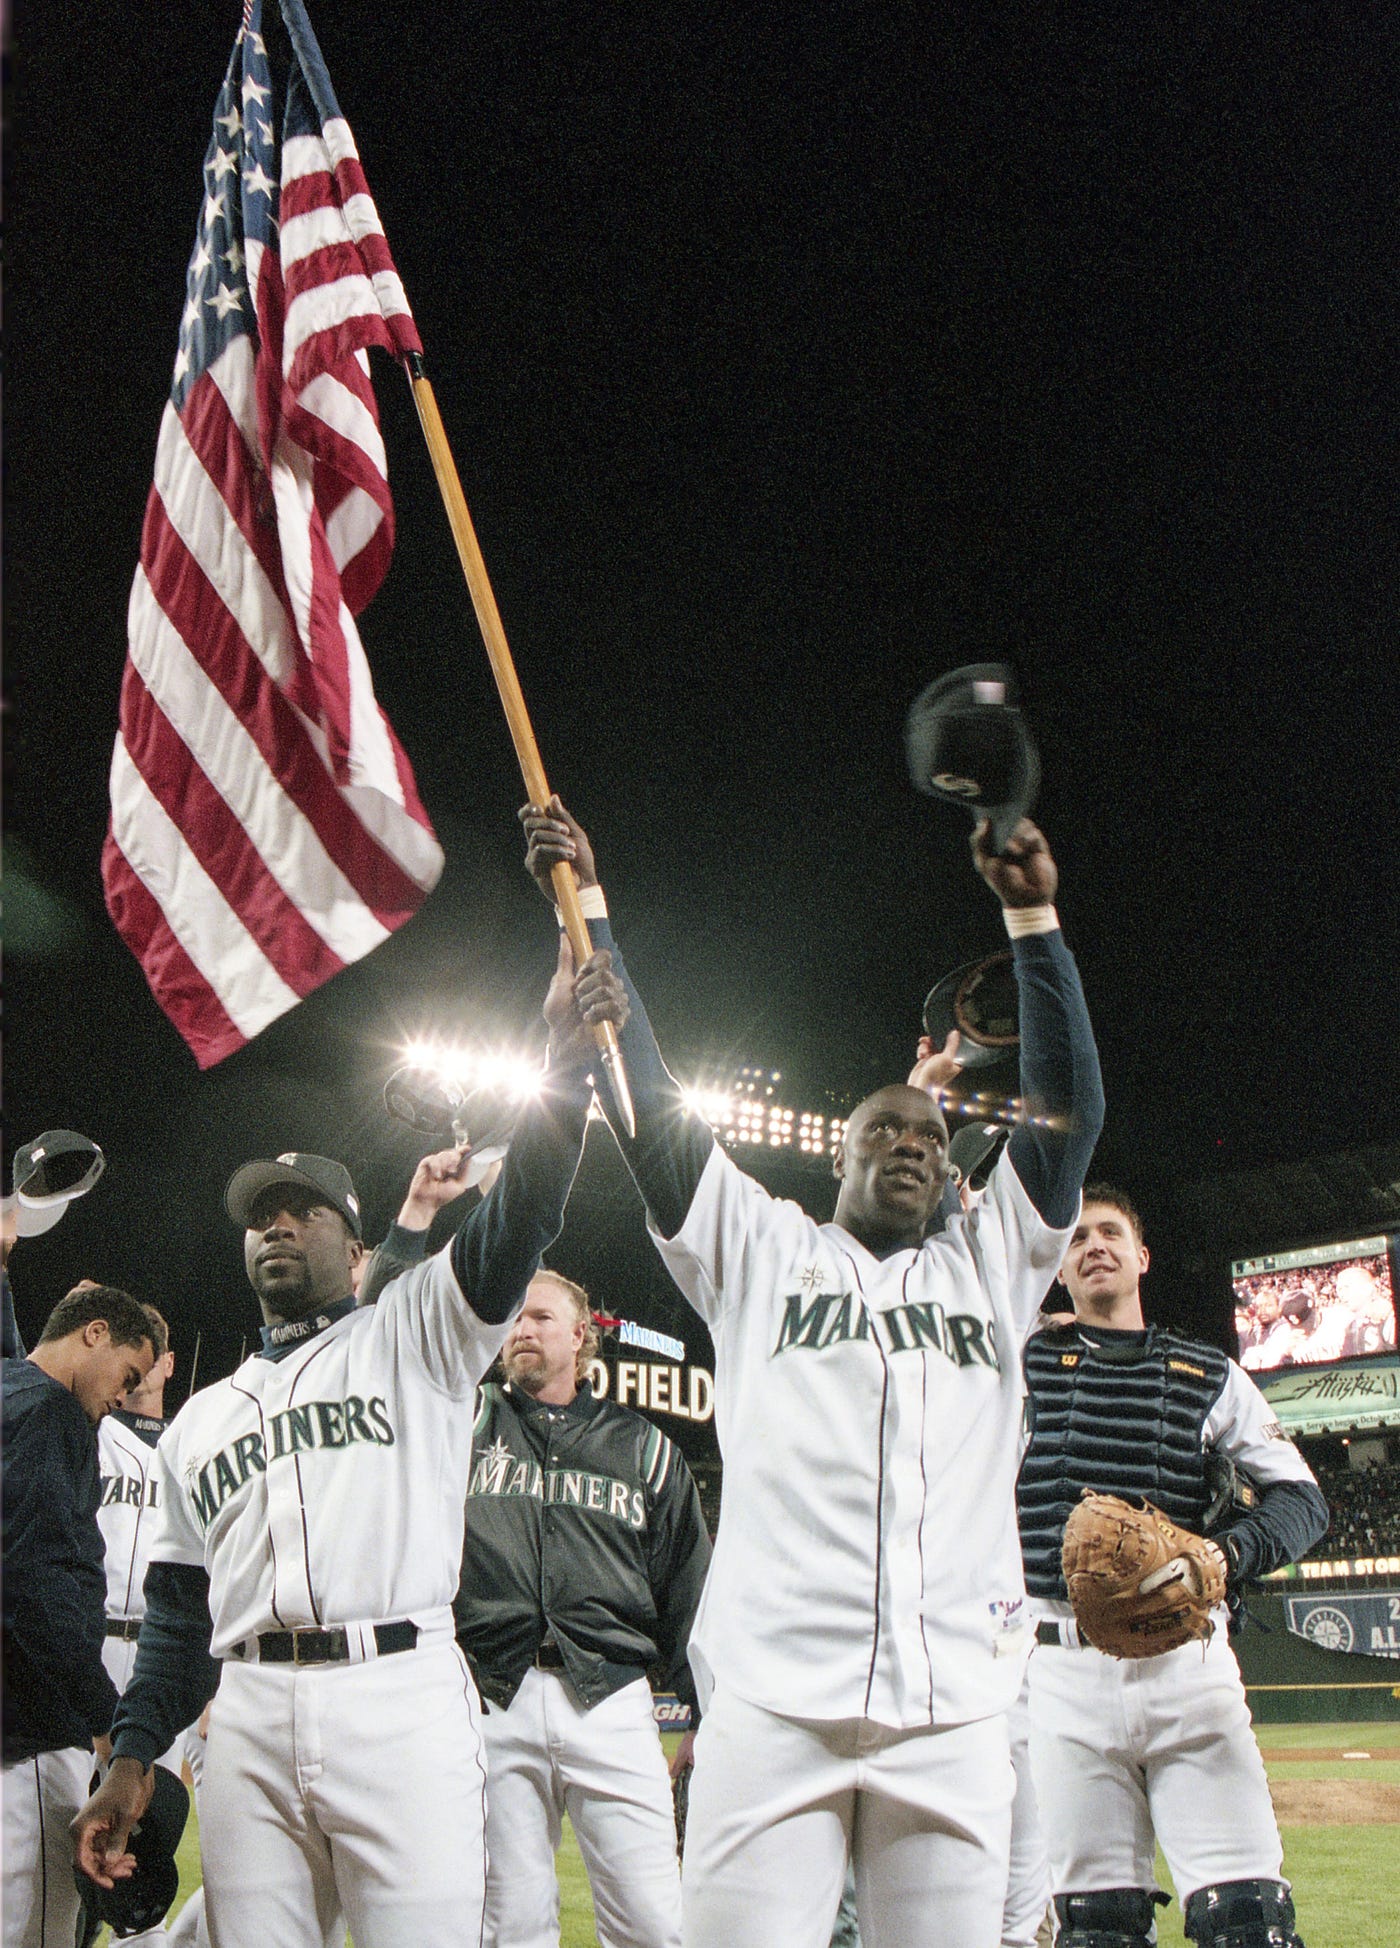 Classic Mariners Games: Mariners Clinch 2001 AL West Title, by Mariners PR